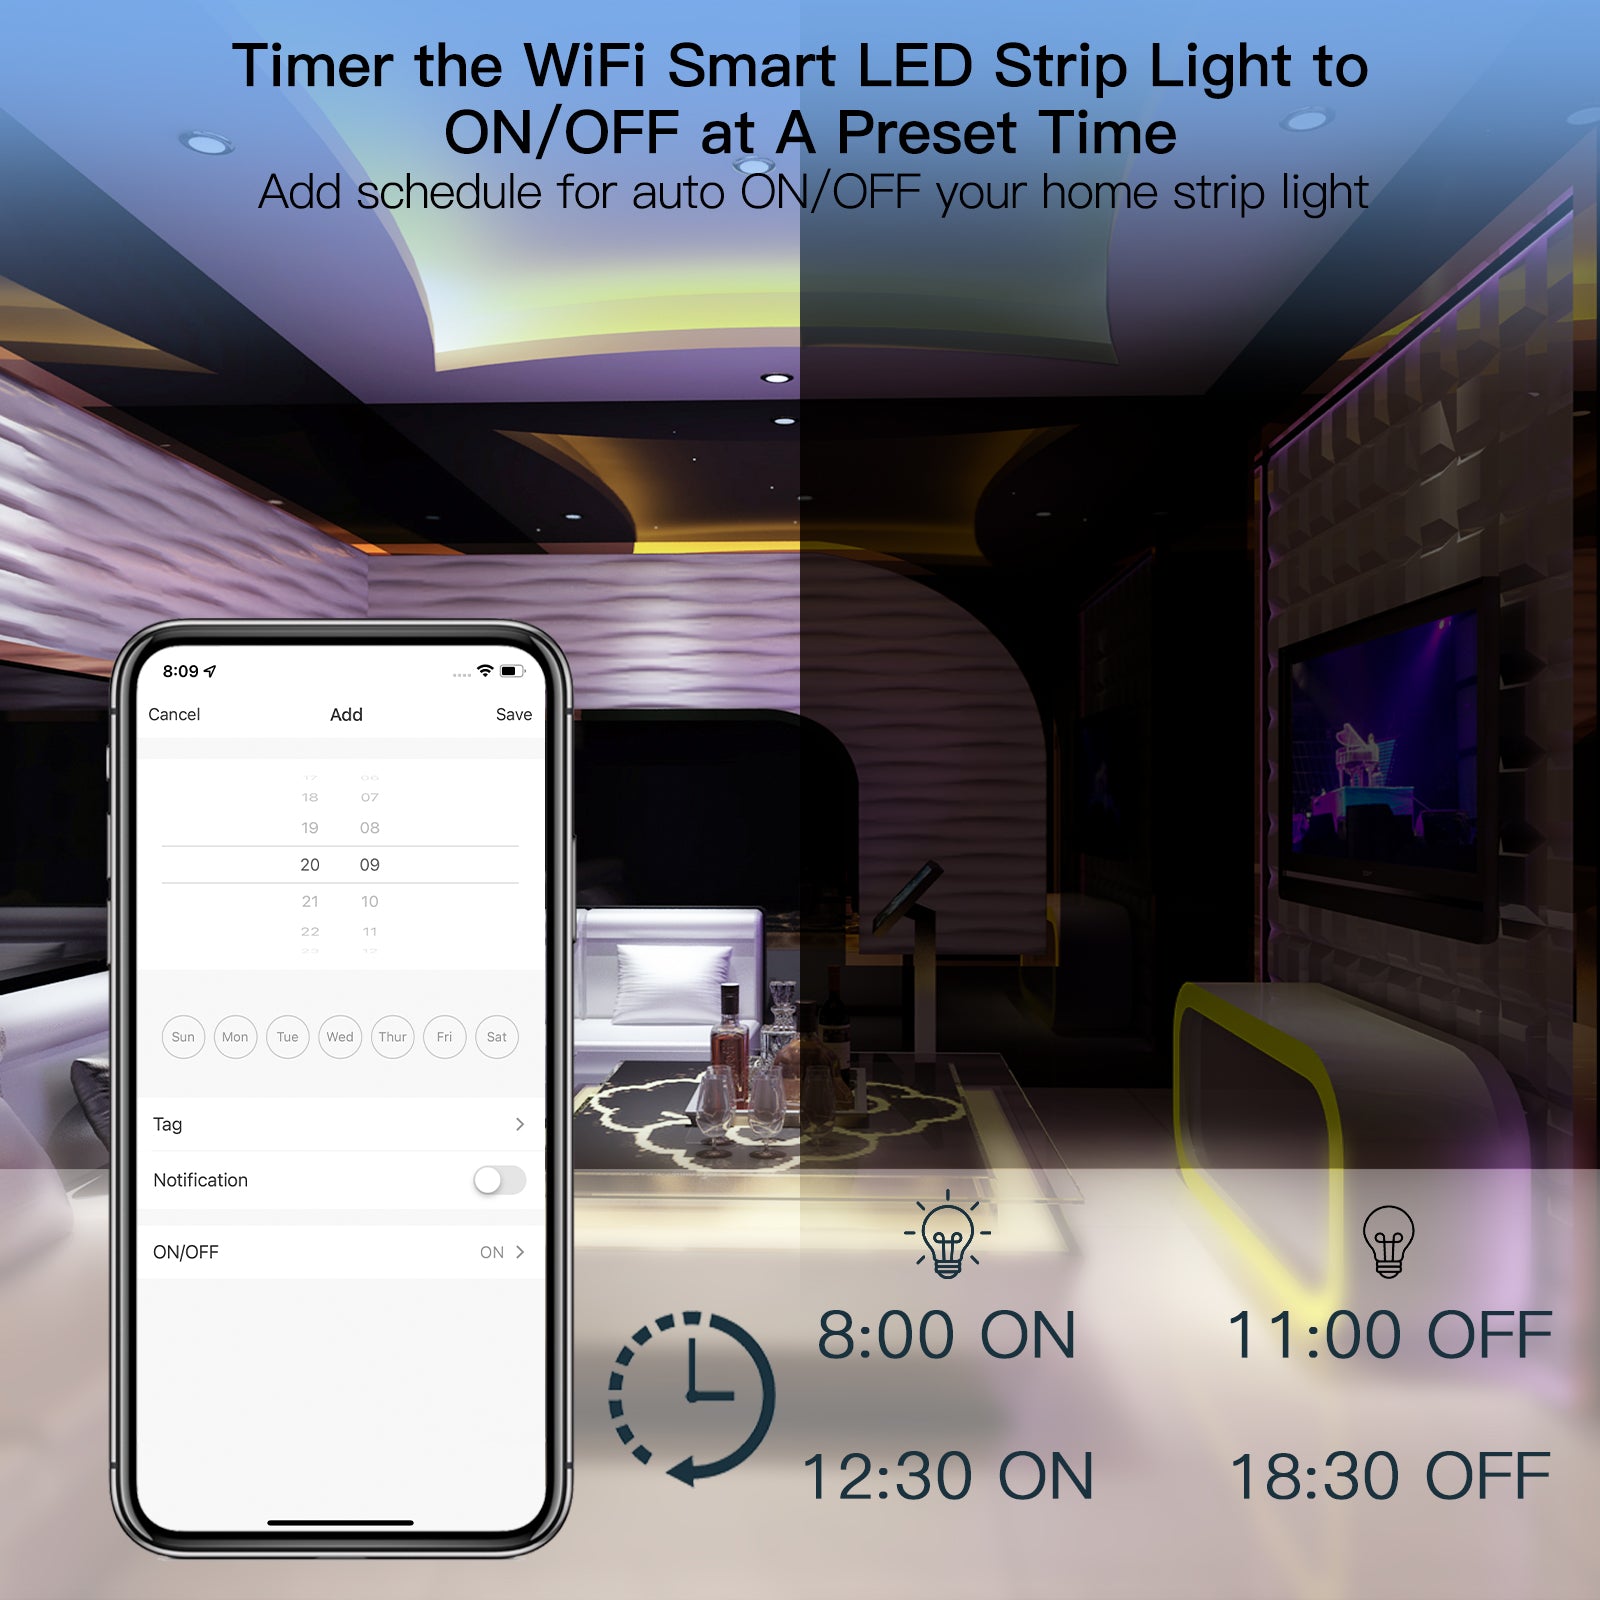 Add schedule for auto ON/OFF your home strip light